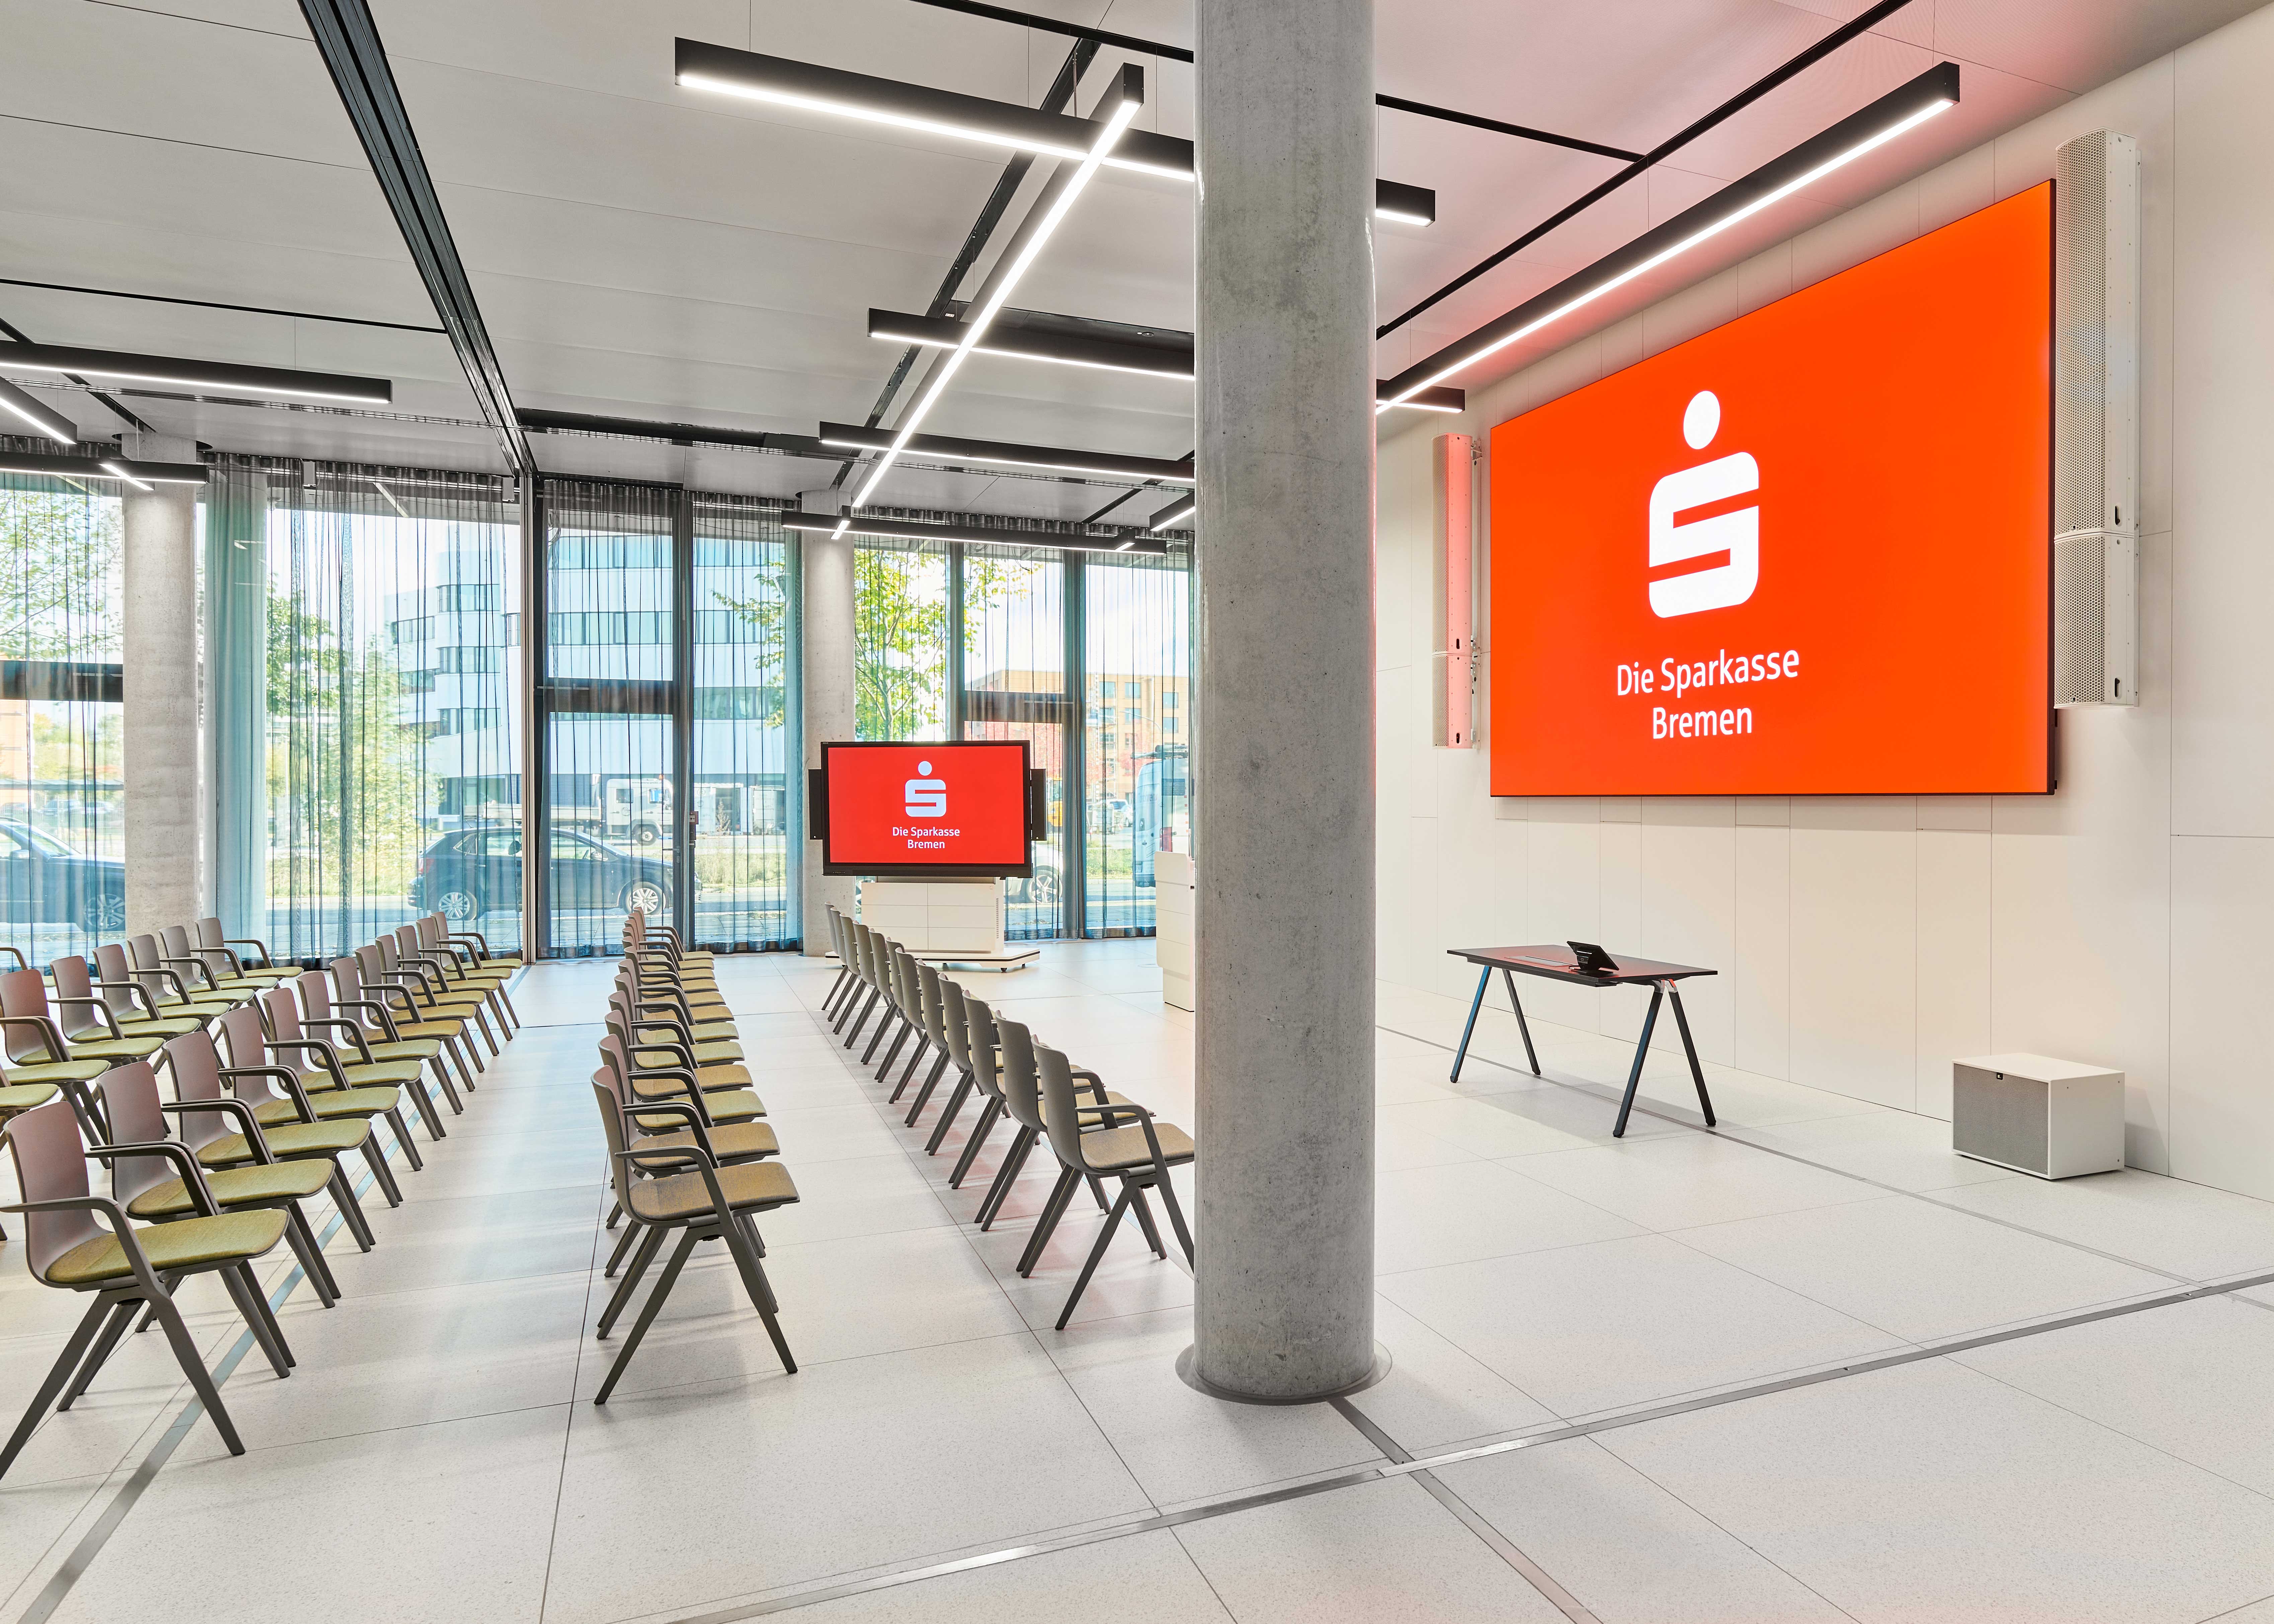 INFiLED installed two LED screens with a pixel pitch of 1.25mm for Sparkasse Bremen to help Sparkasse Bremen digitally upgrade.